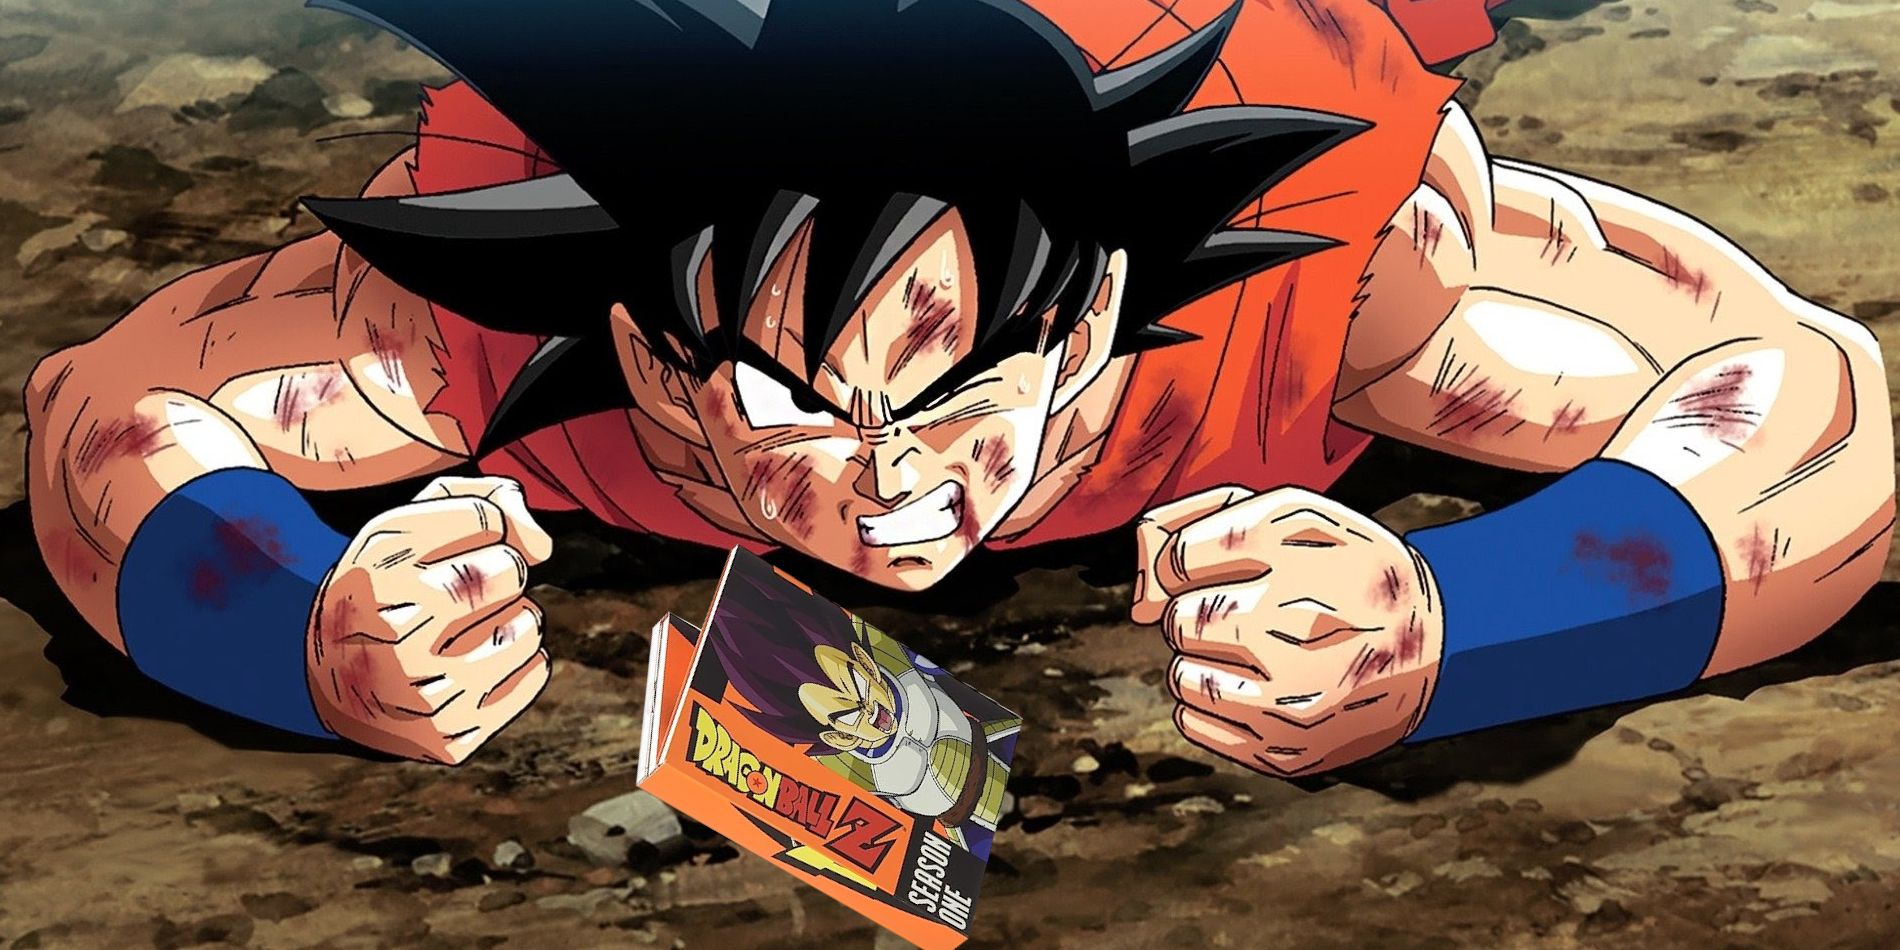 Image shows Goku laying on his stomach after getting hurt. One year is closed and his arms are outstretched with both fists clenched with a Orange DVD of Dragon Ball Z season one in front of him.